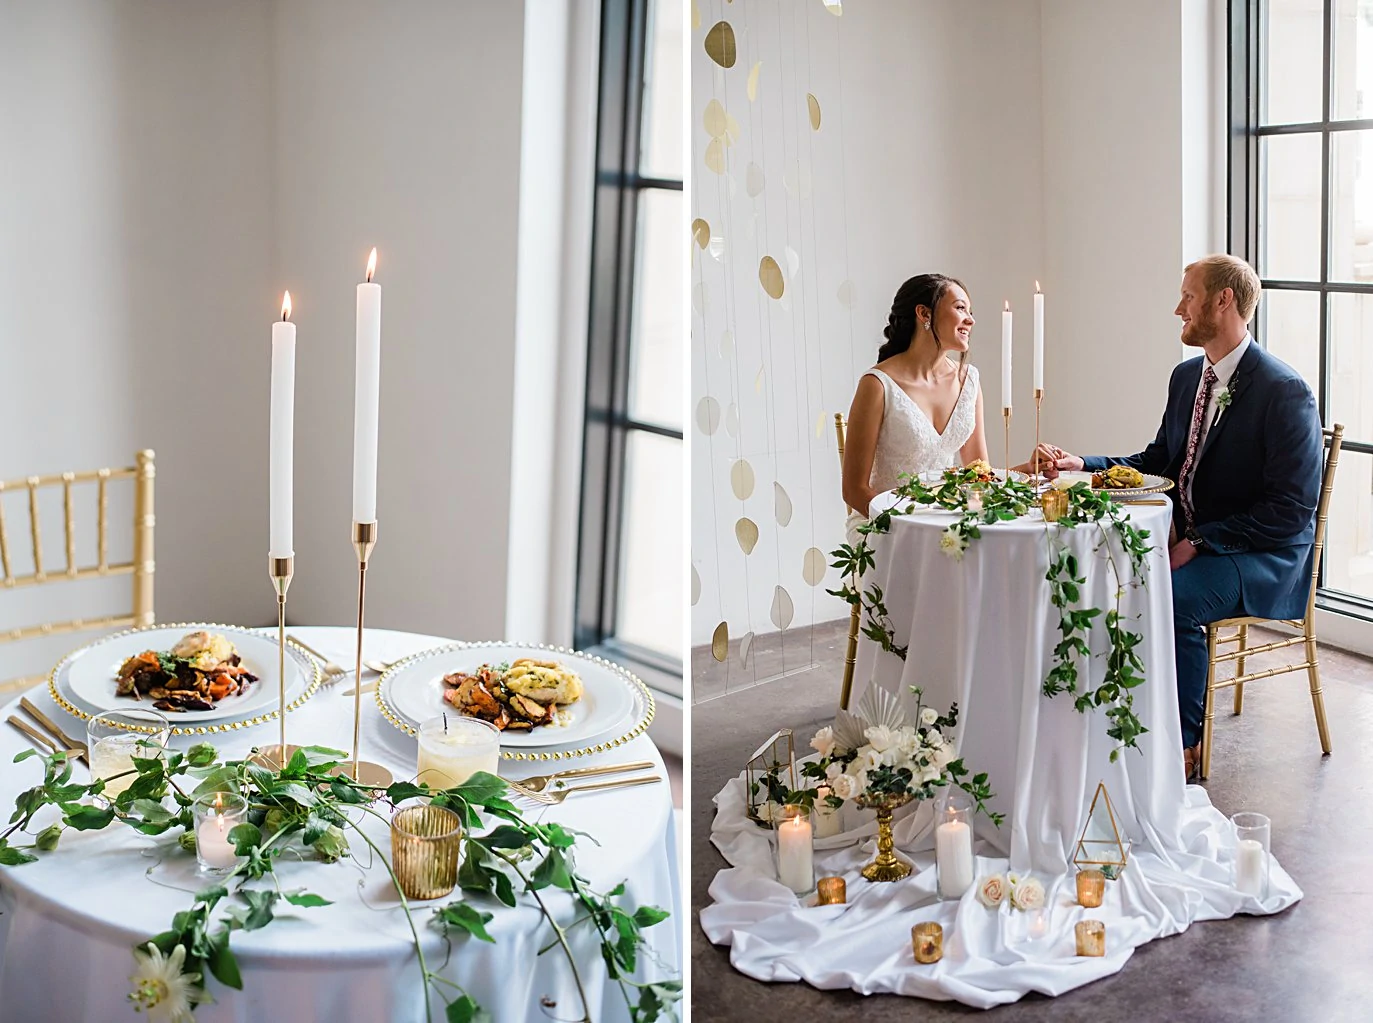 sweatheart table with copper accents and candles at Walker Fine Art Gallery Wedding by Boulder Wedding Photographer Jennie Crate